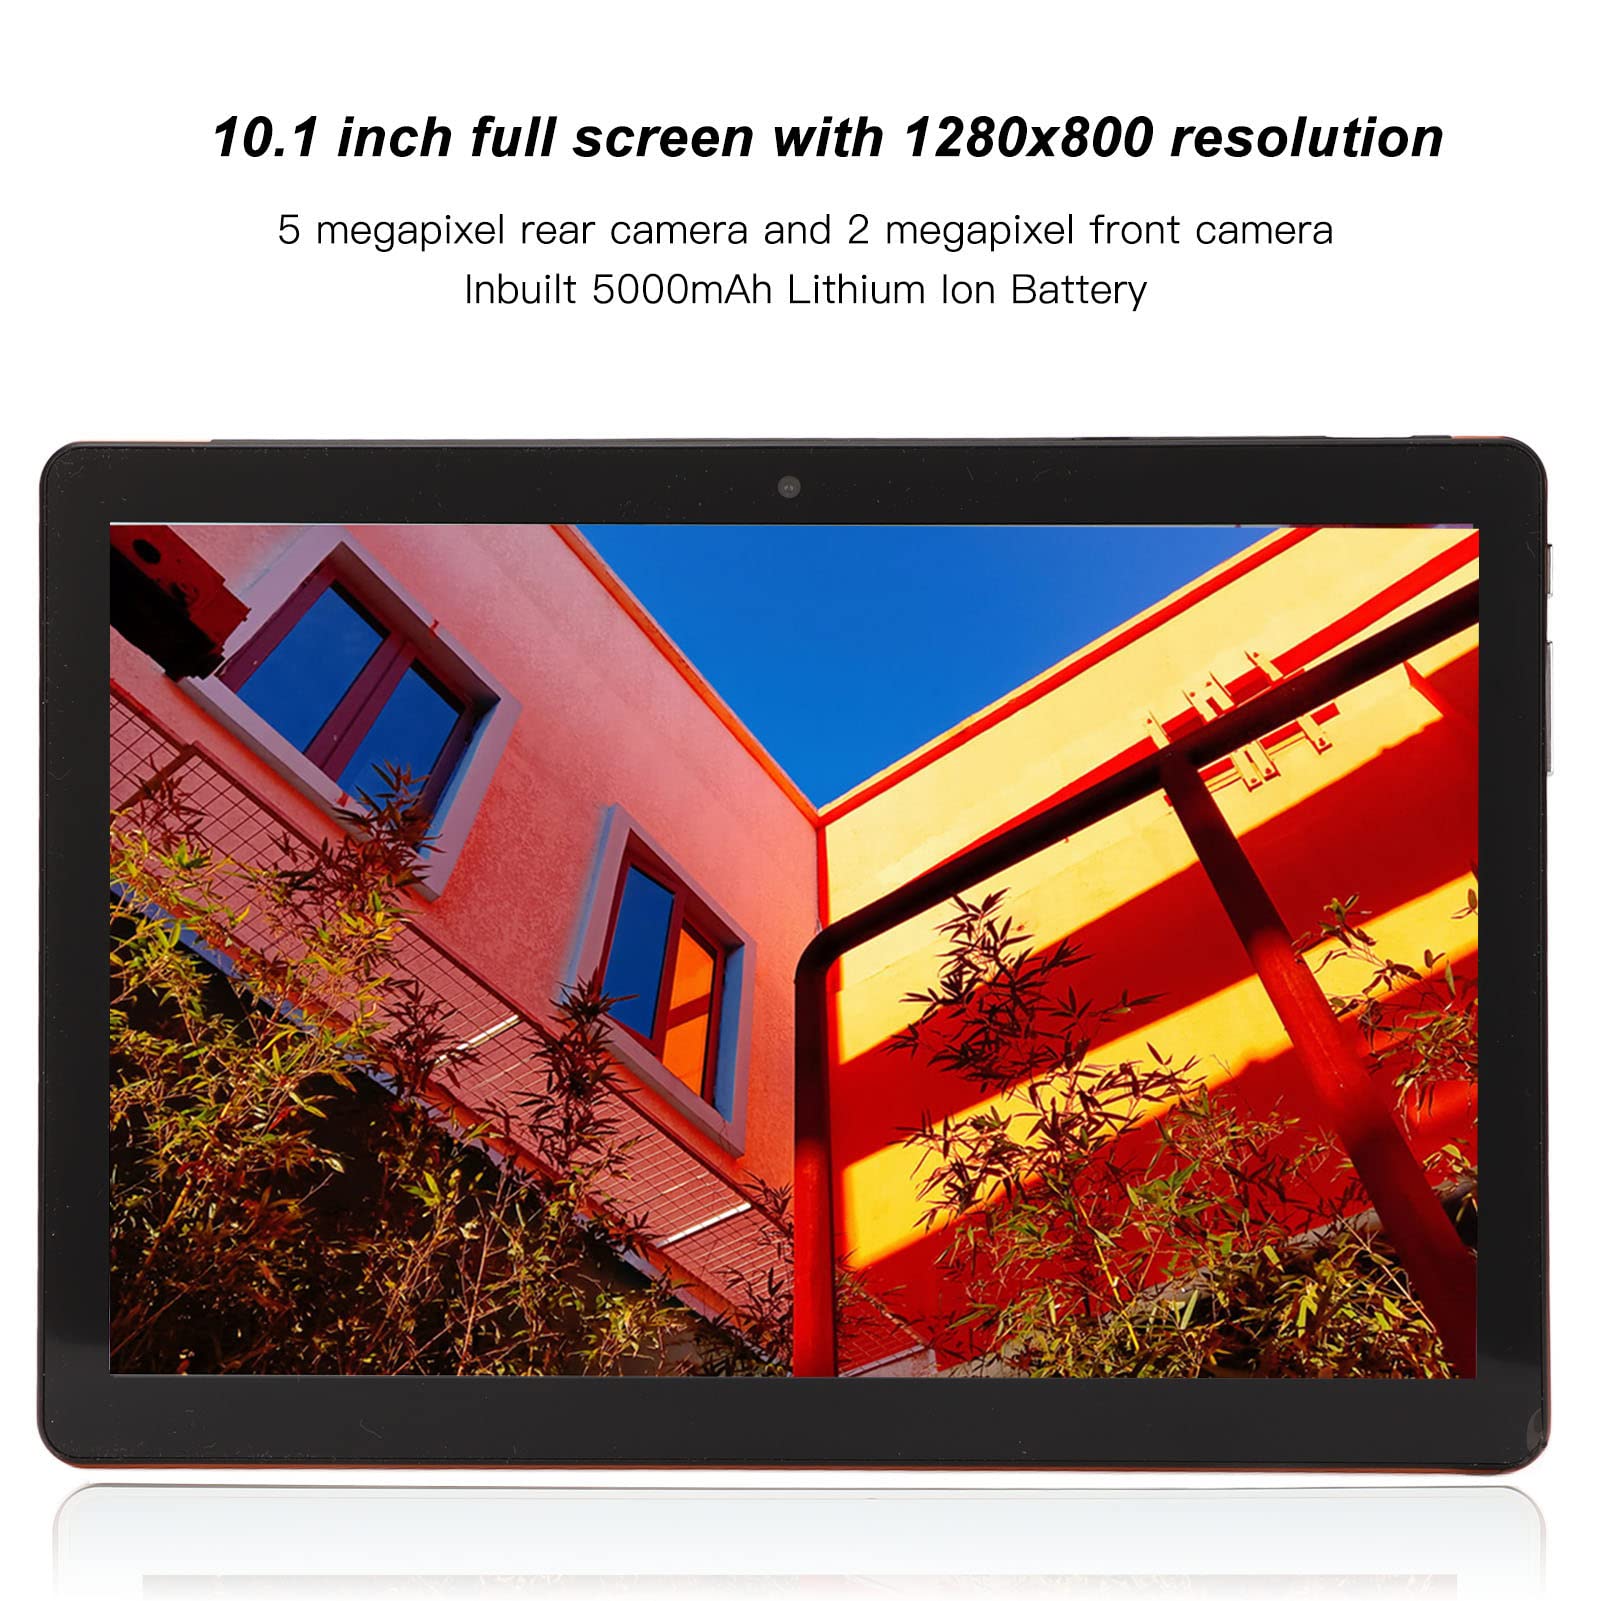 Septpenta 10.1 Inch HD Tablet, 4GB RAM 64GB ROM, 1280X800 IPS LCD, Dual SIM Dual Standby, 5MP Rear 2MP Front, 5000mAh 4G Orange Tablet for Android9.0(USA)